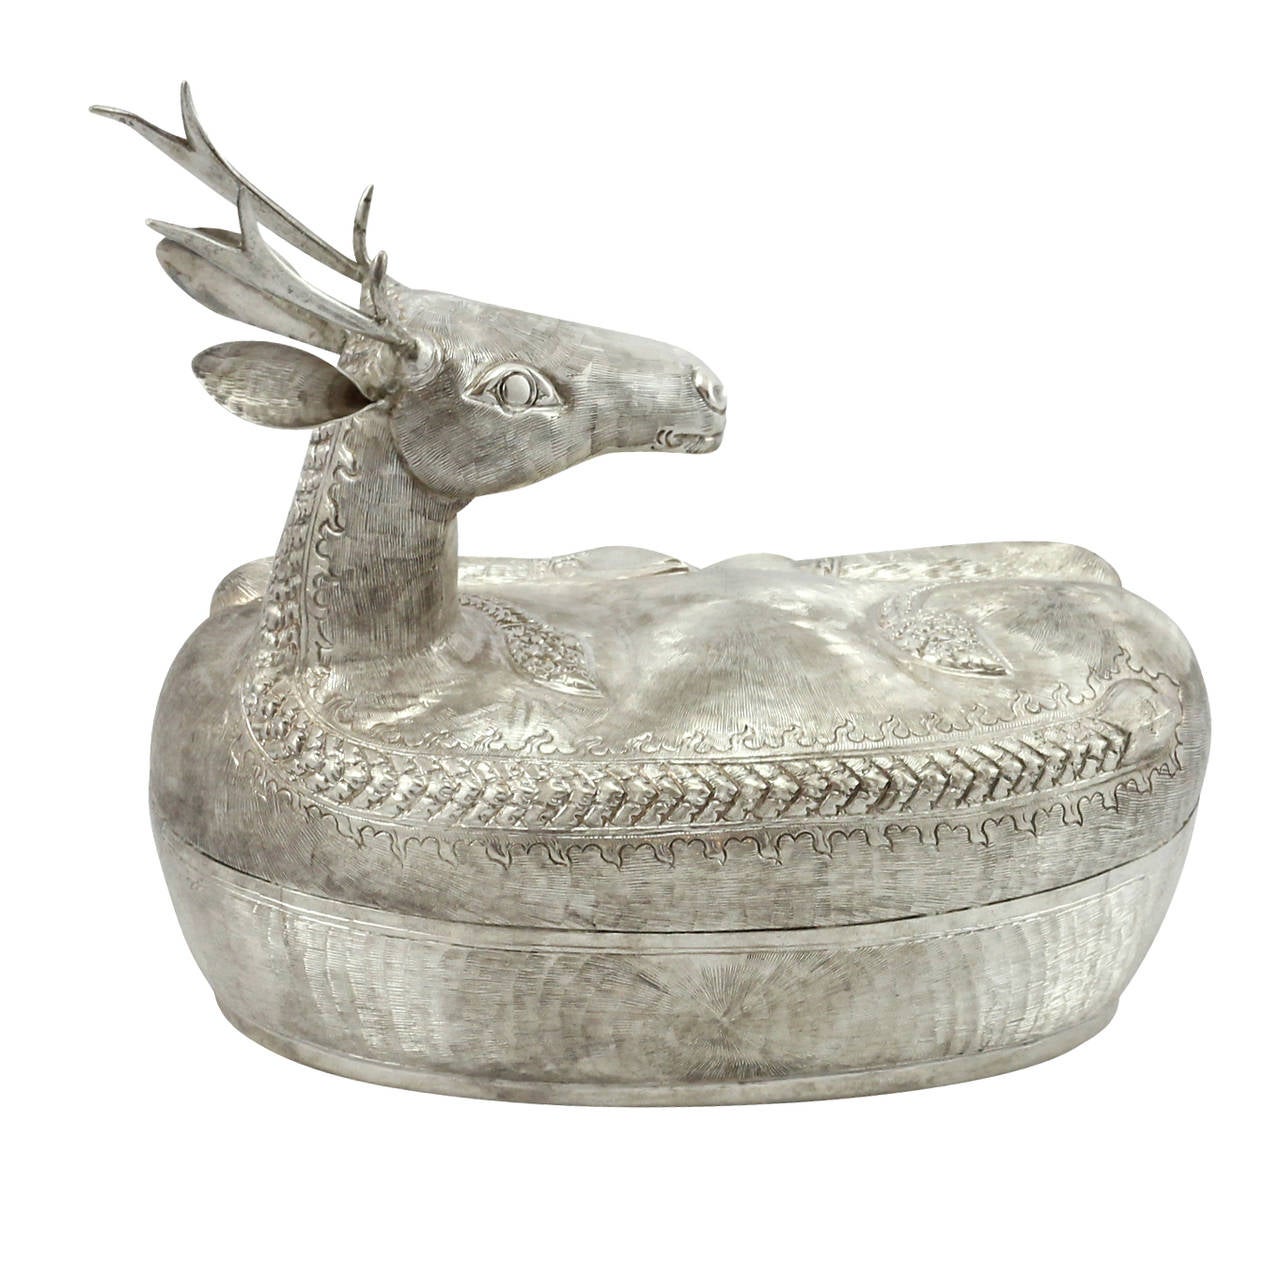 A .900 silver betel nut container in the form of a reclined deer. Handmade with repoussé and chased details. Produced in Cambodia. Stamped S. Khân.